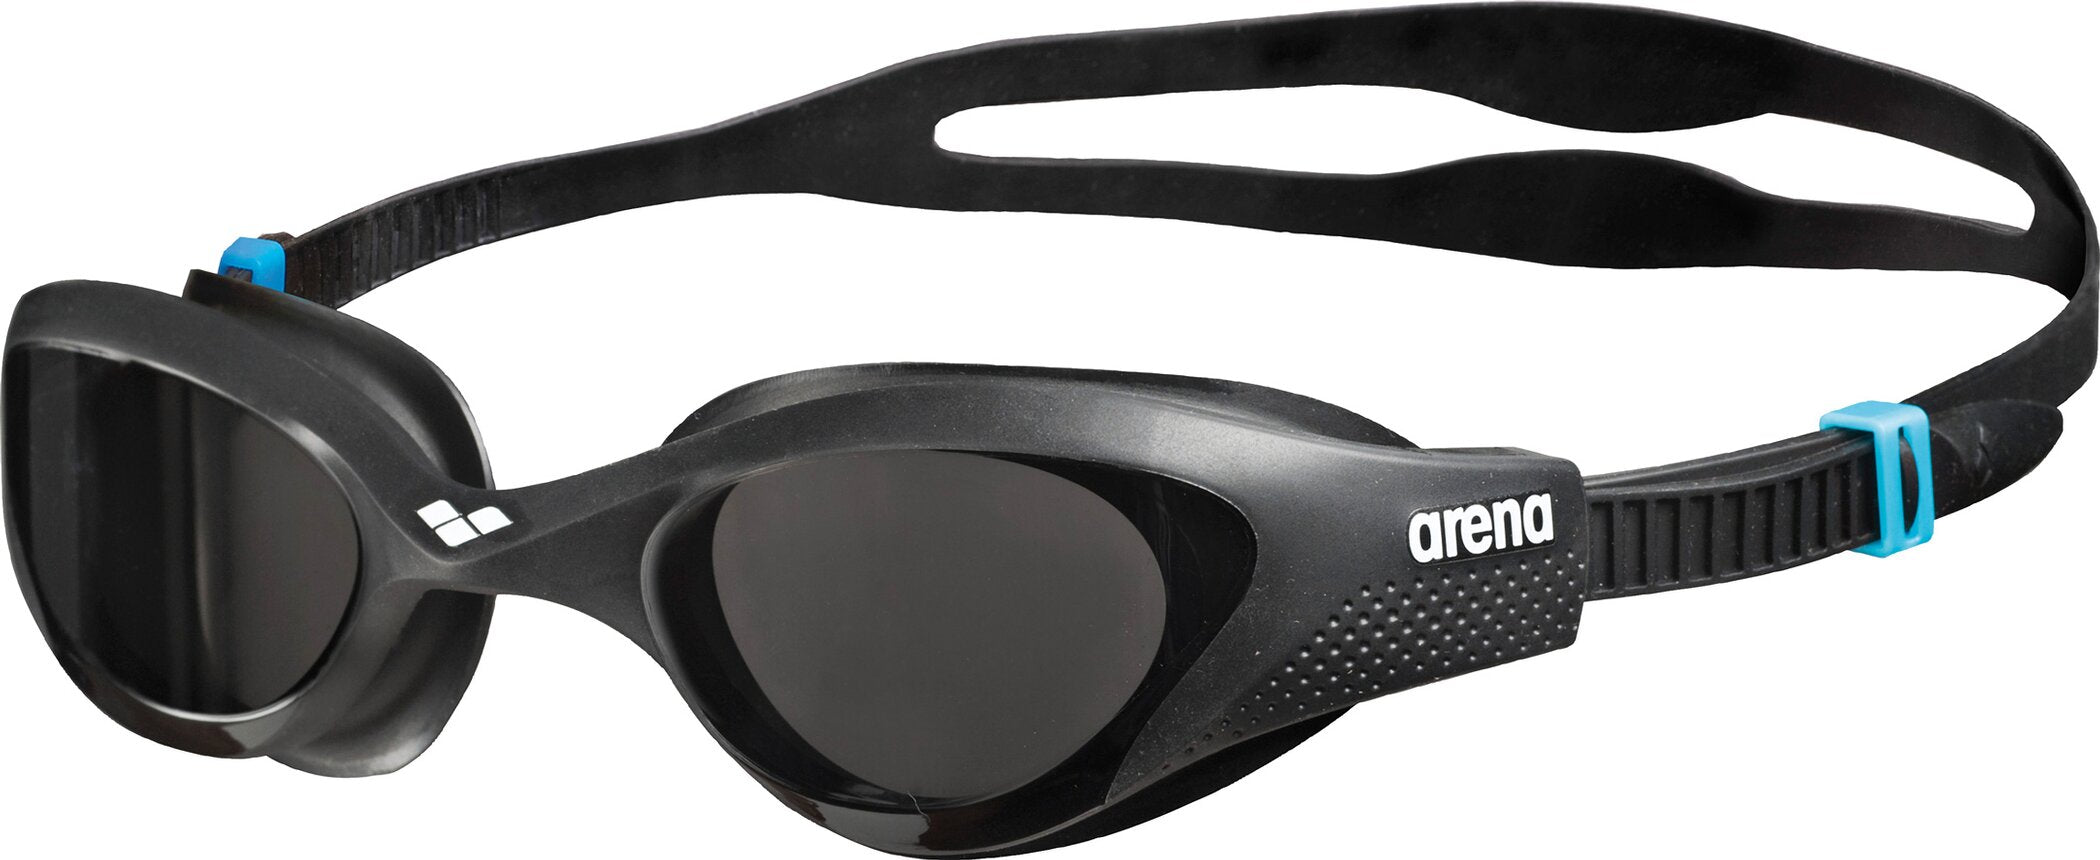 Unisex Schwimmbrille The One